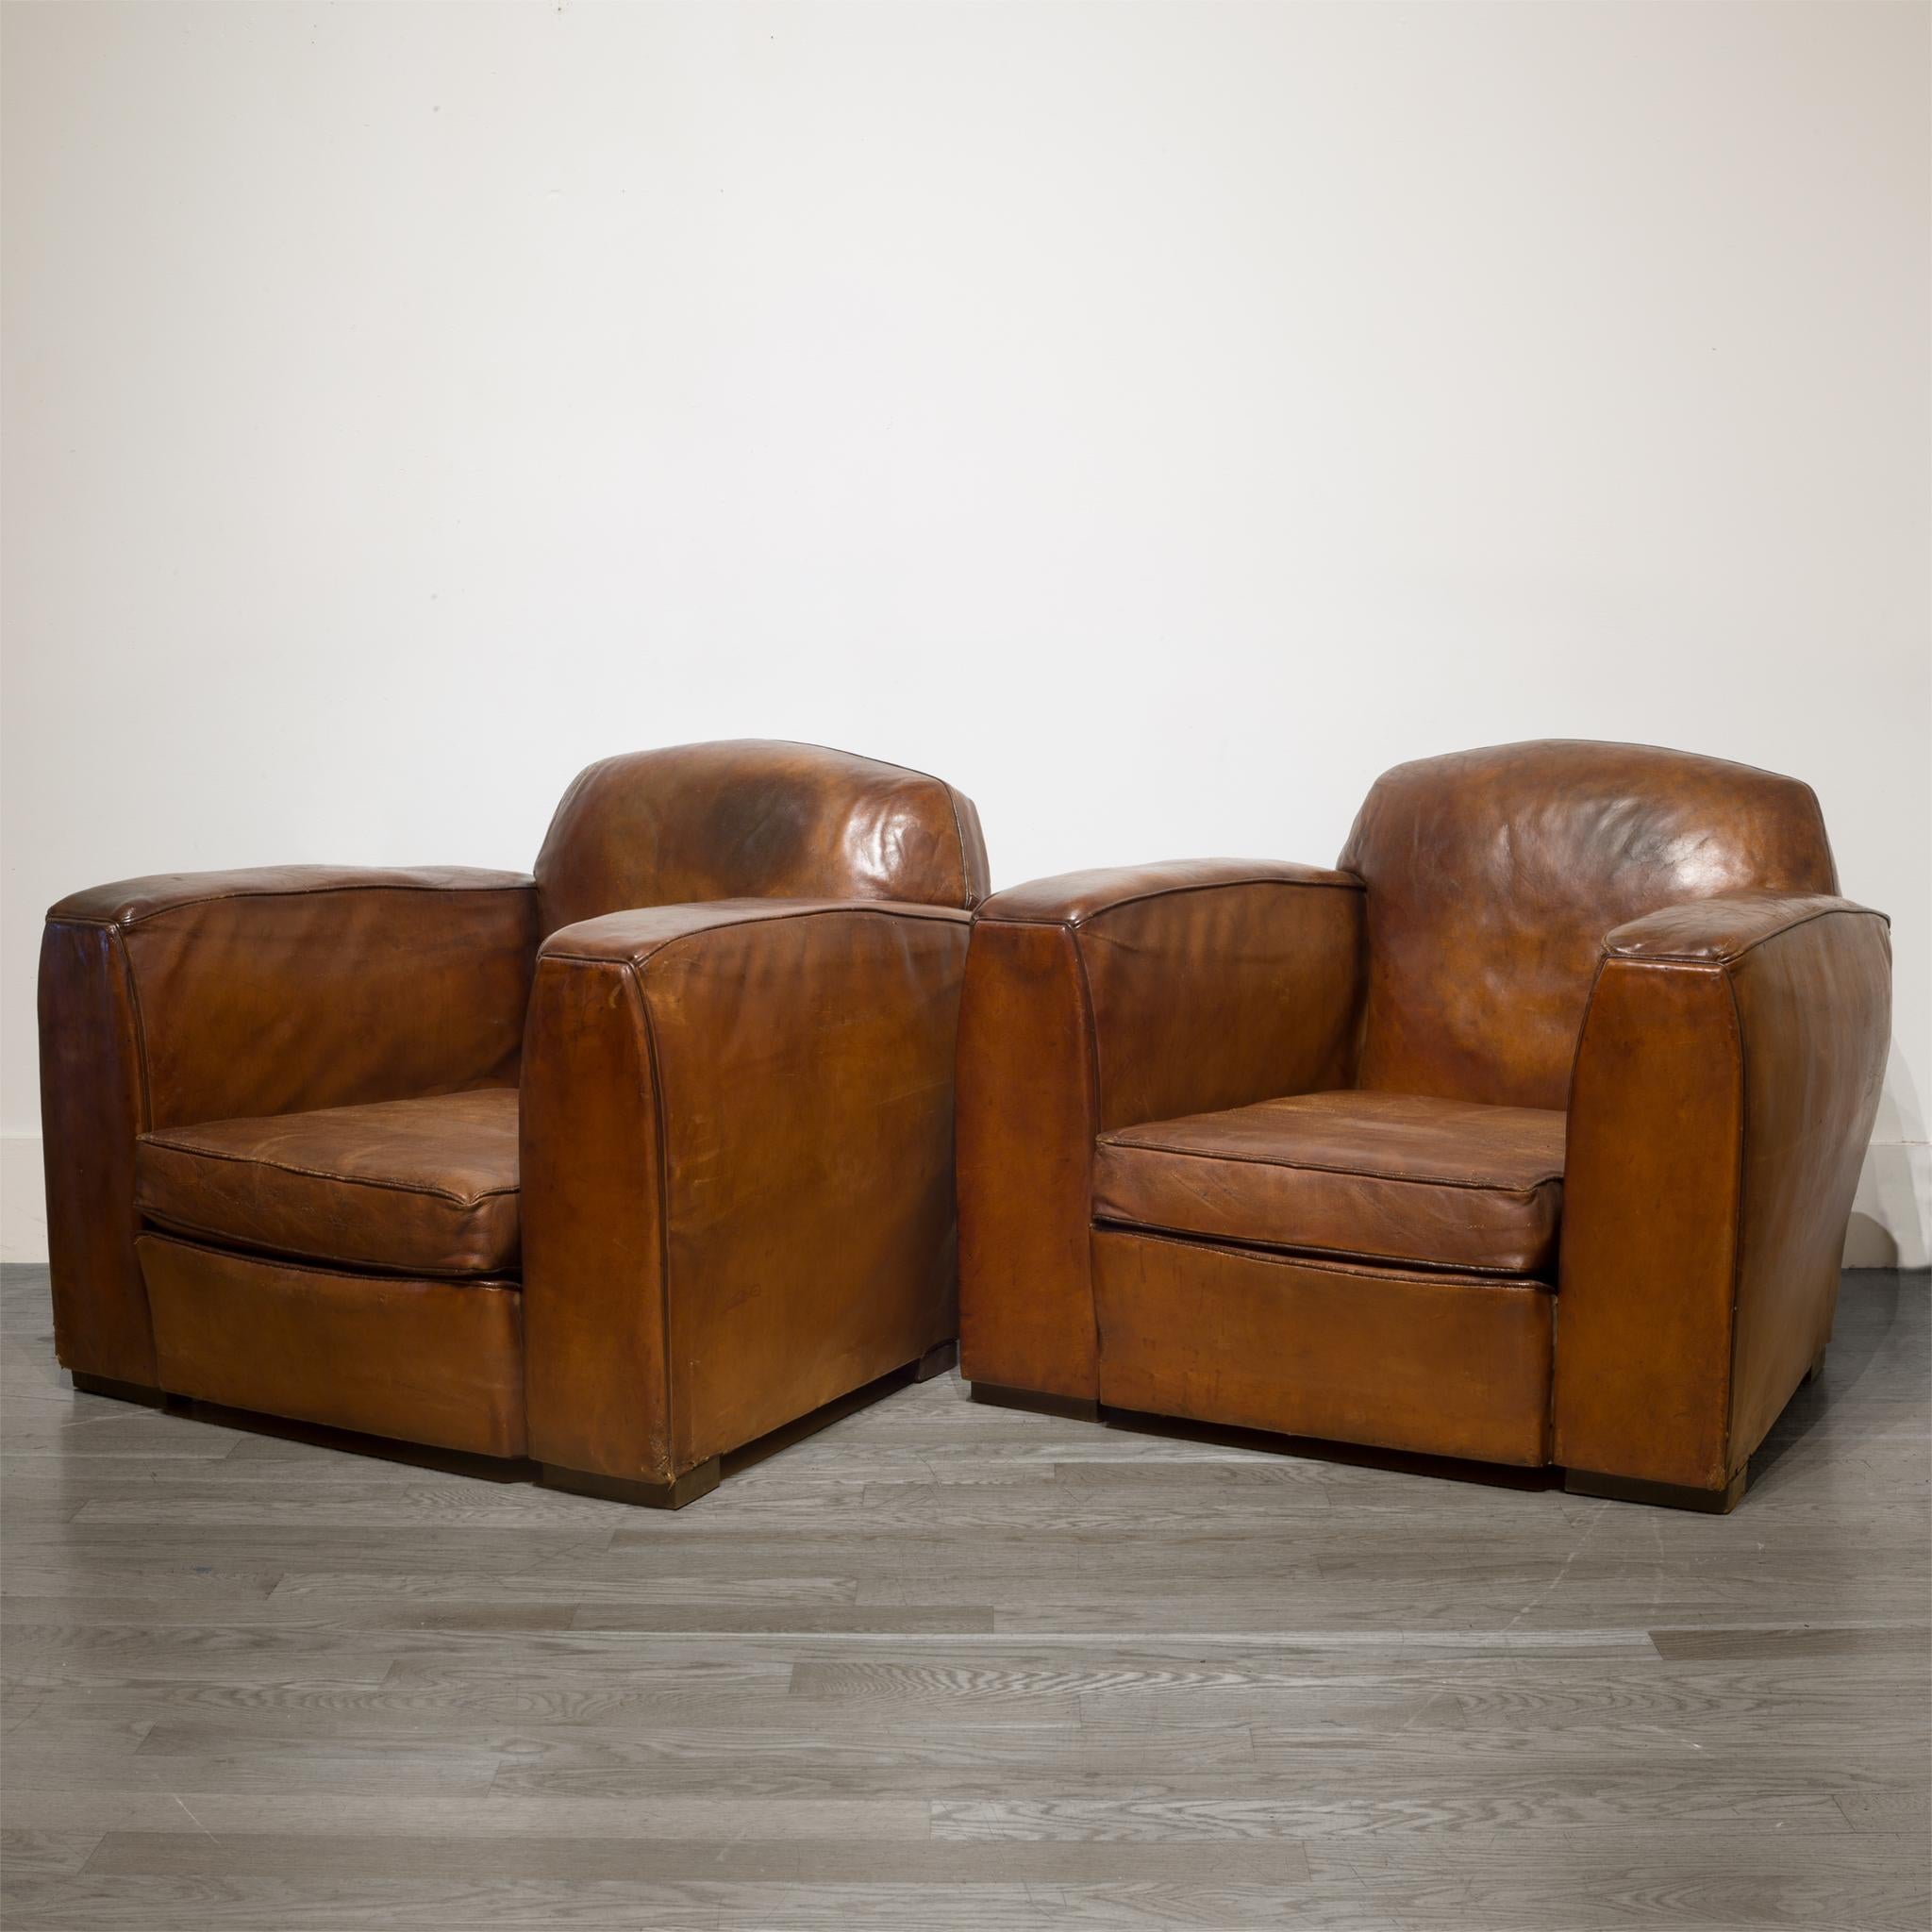 20th Century Pair of French Sheepskin Leather Club Chairs, circa 1920s